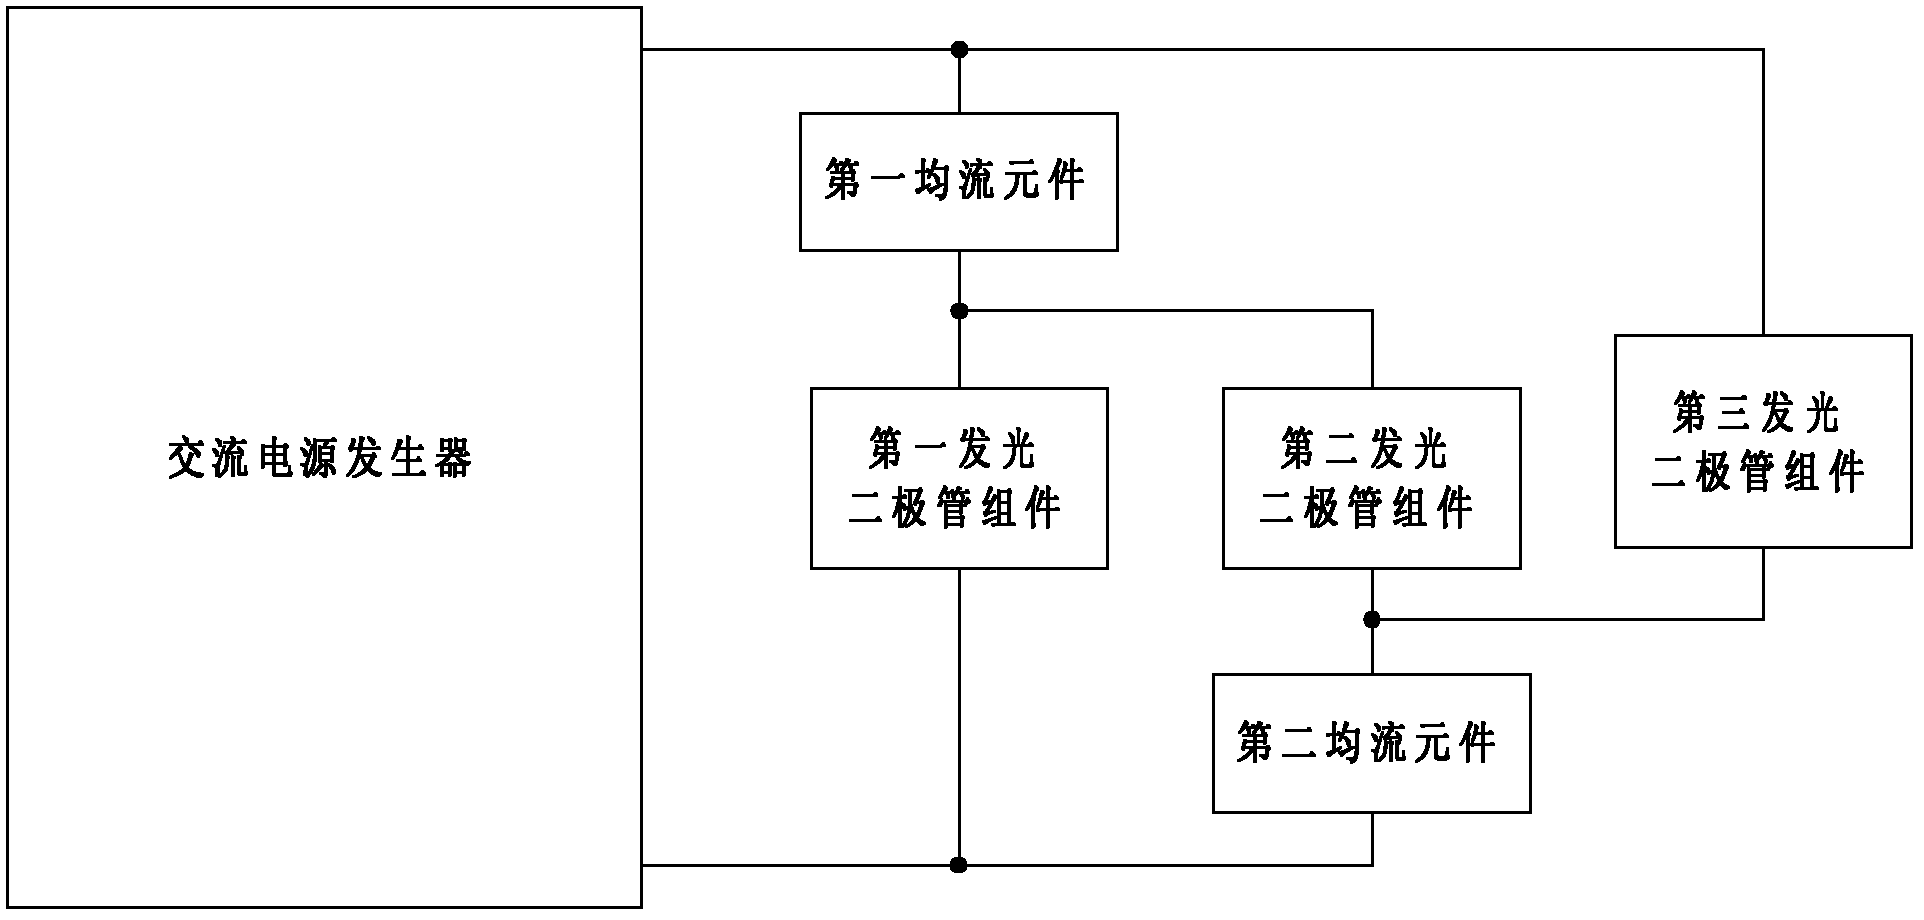 Current balancing circuit with multi-path output